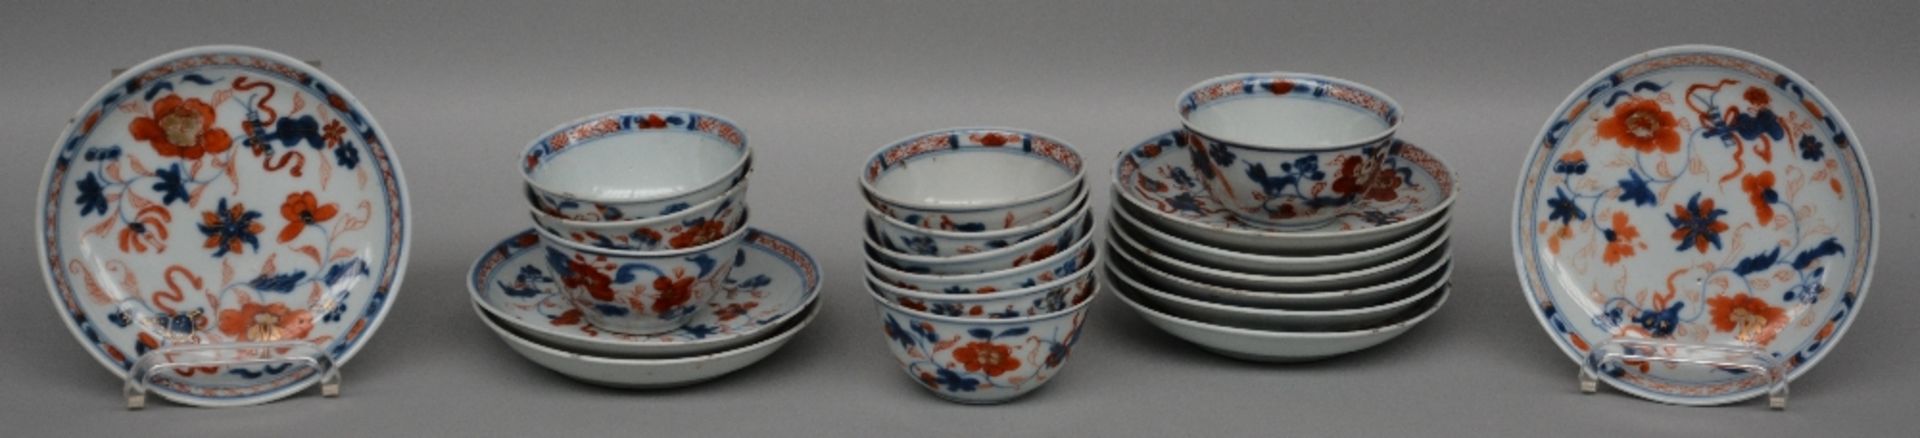 Ten Chinese cups and saucers with floral imari decoration, 18thC, Diameter 12 cm - 7,5 cm (chips on